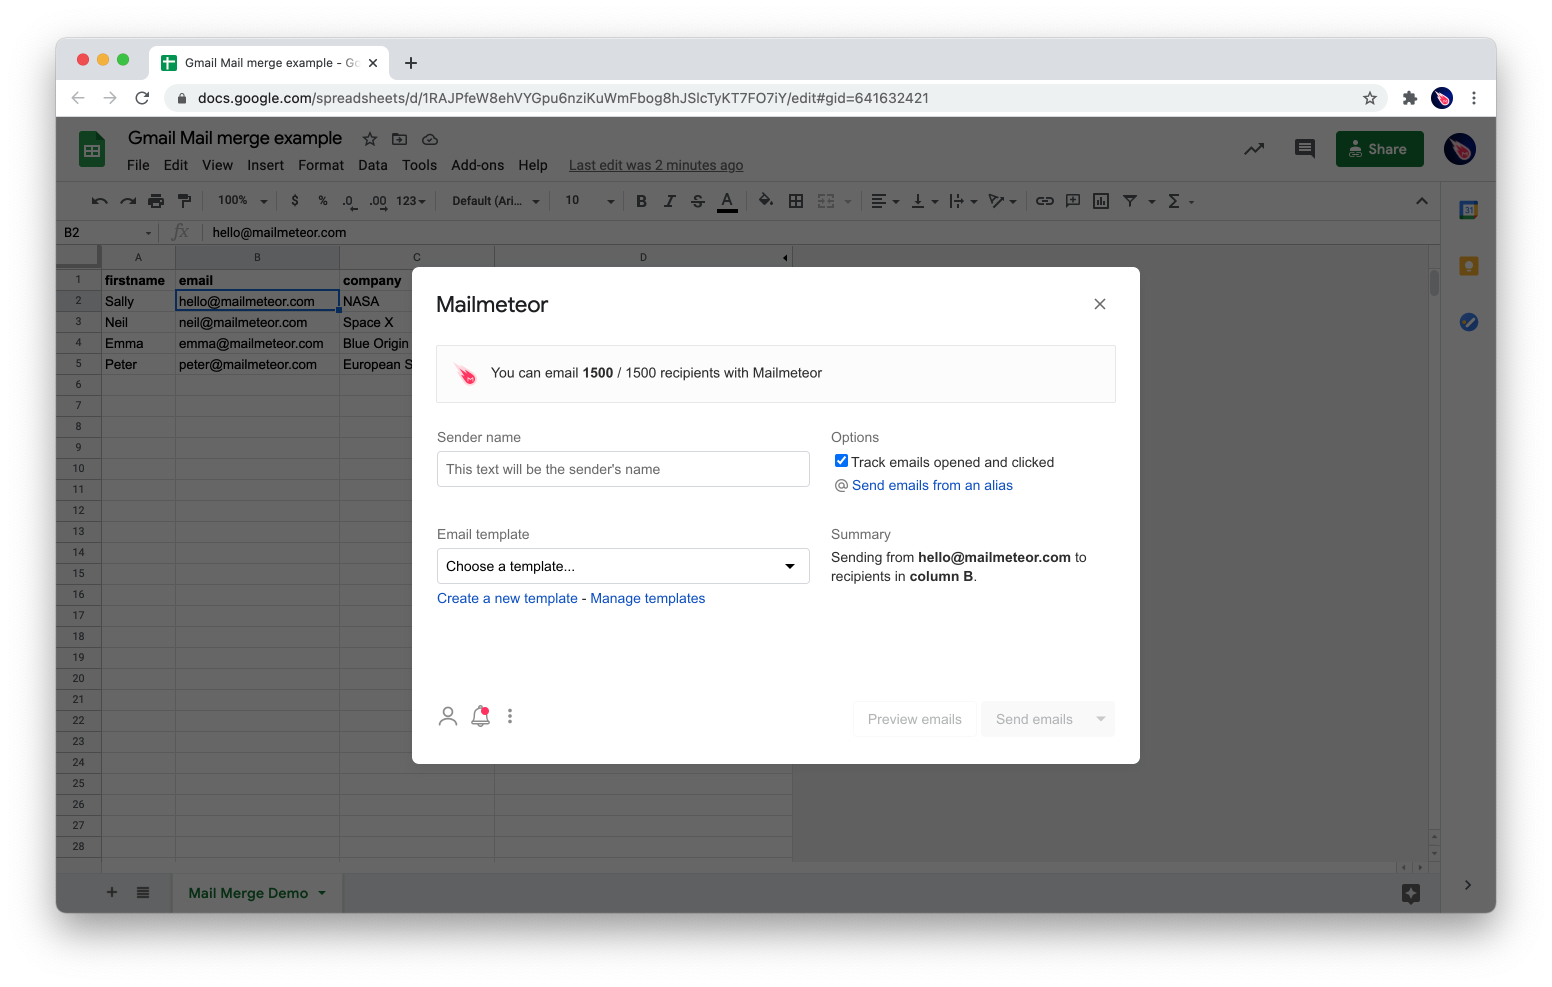 Open Mailmeteor add-on to mail merge in Google Sheets